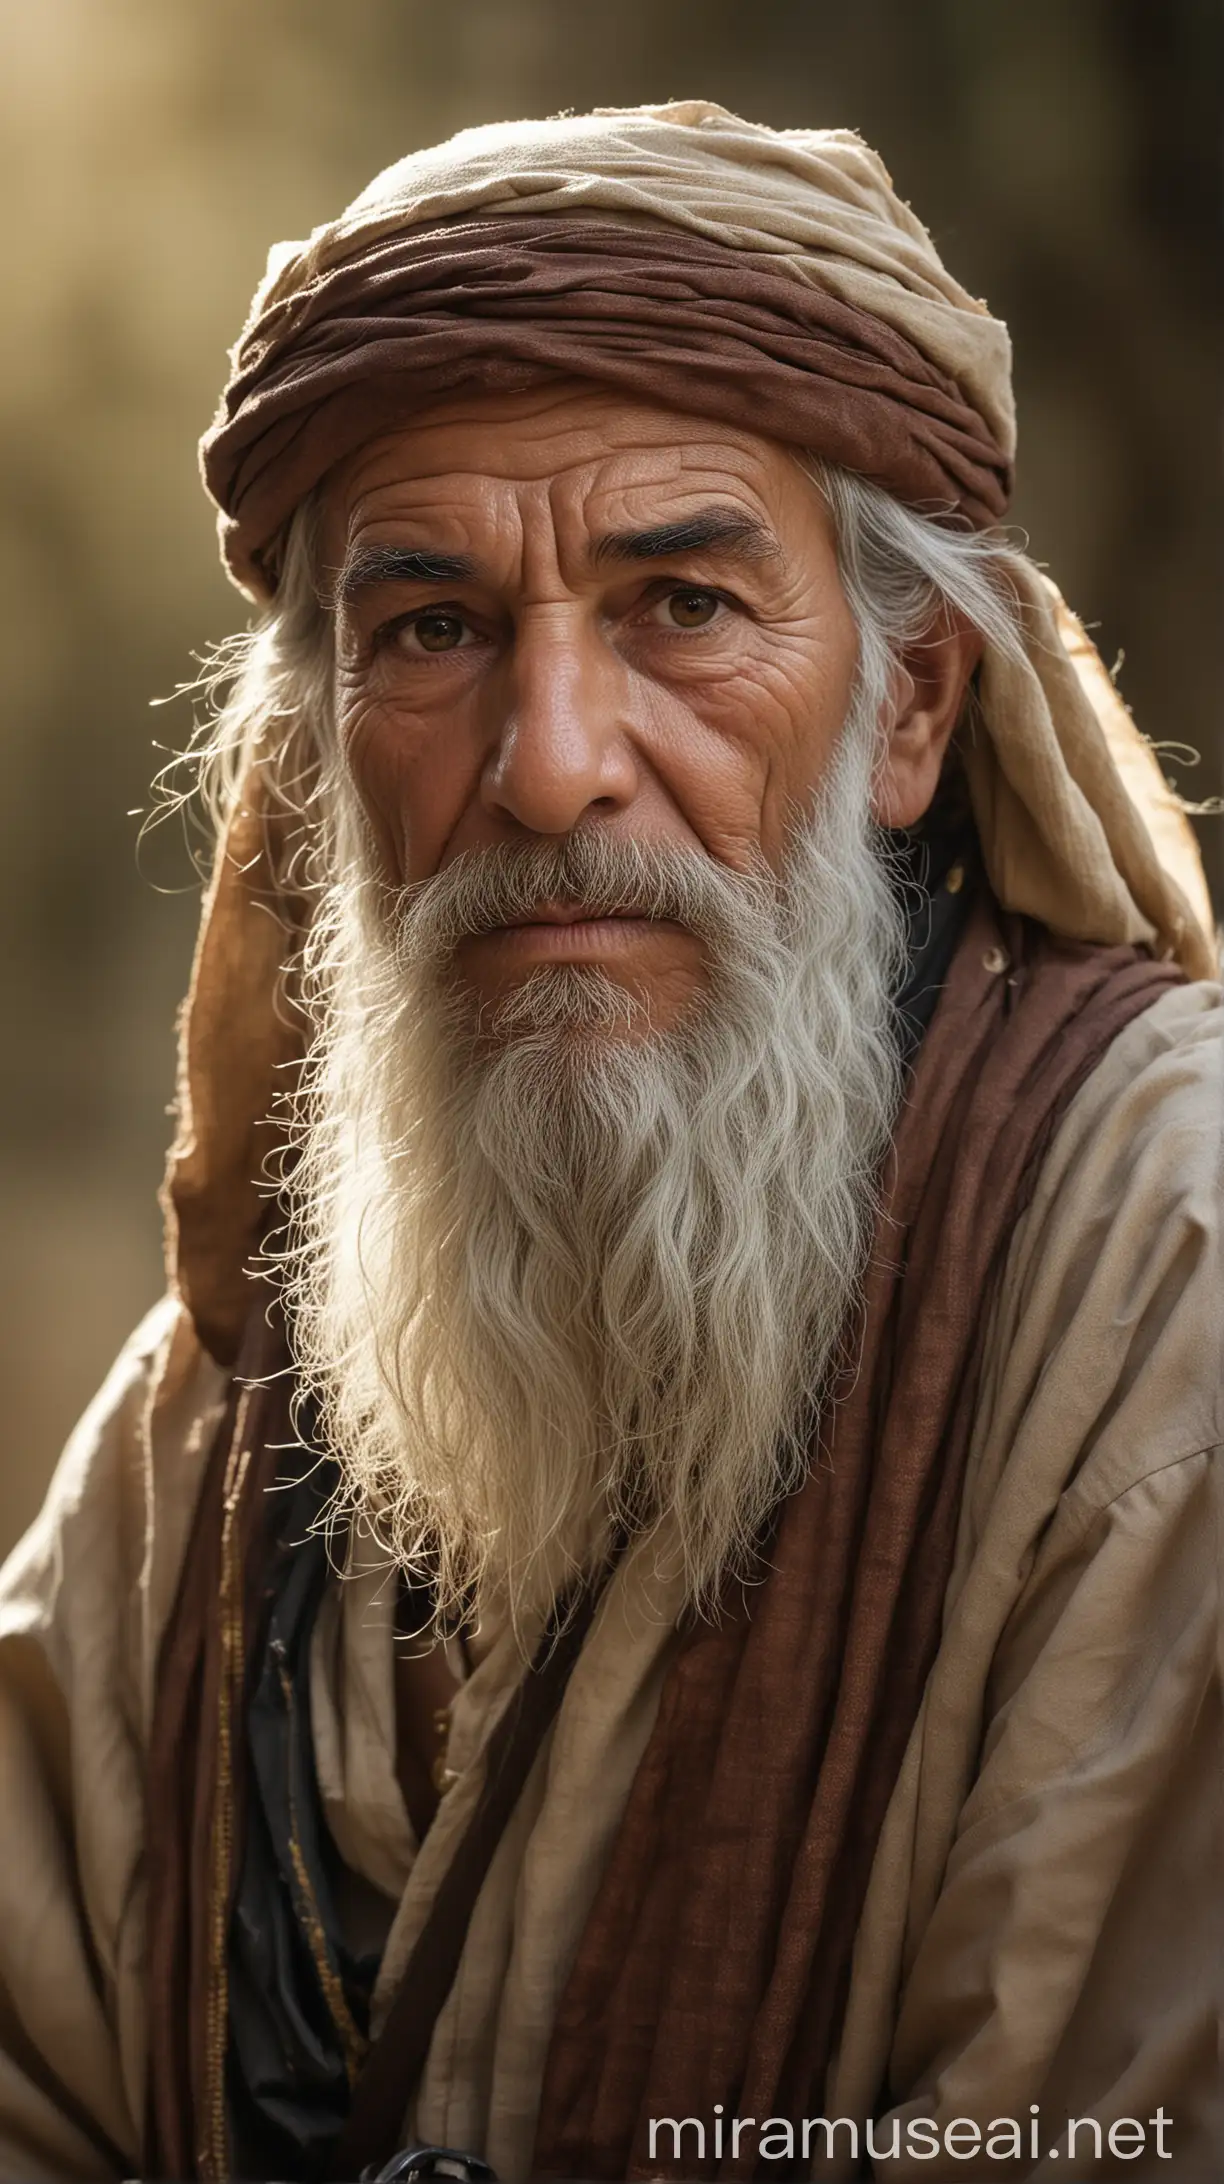 Motivational Wise Man Portrait with Soft Ethereal Lighting